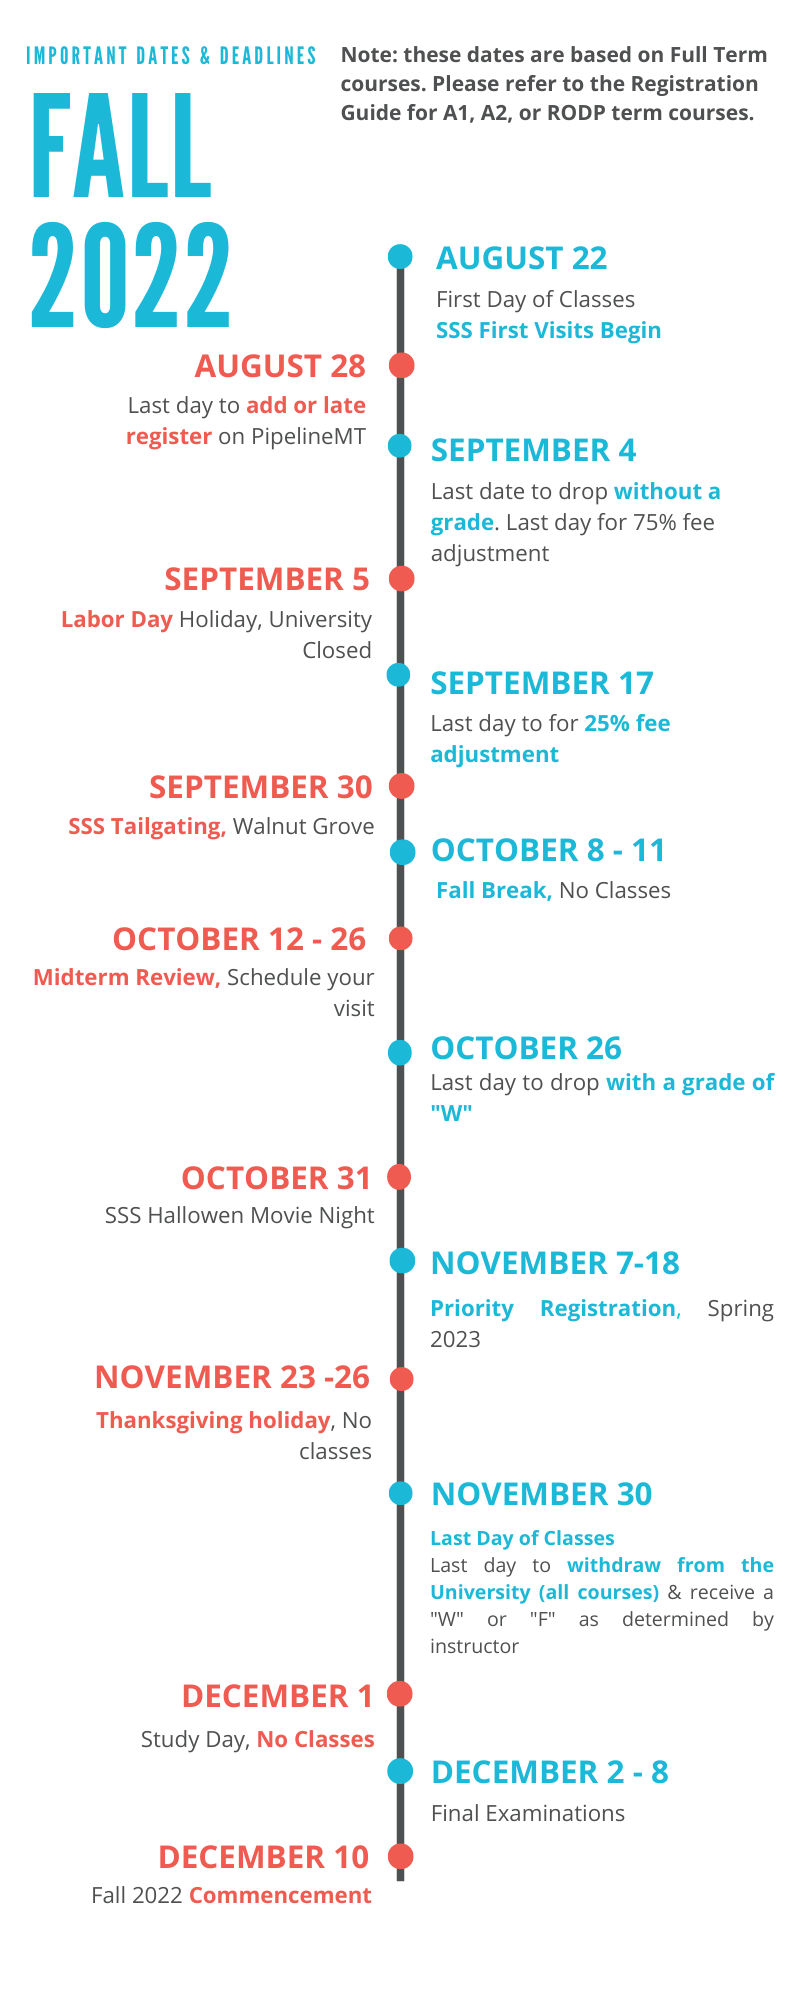 F22 Dates and Deadlines